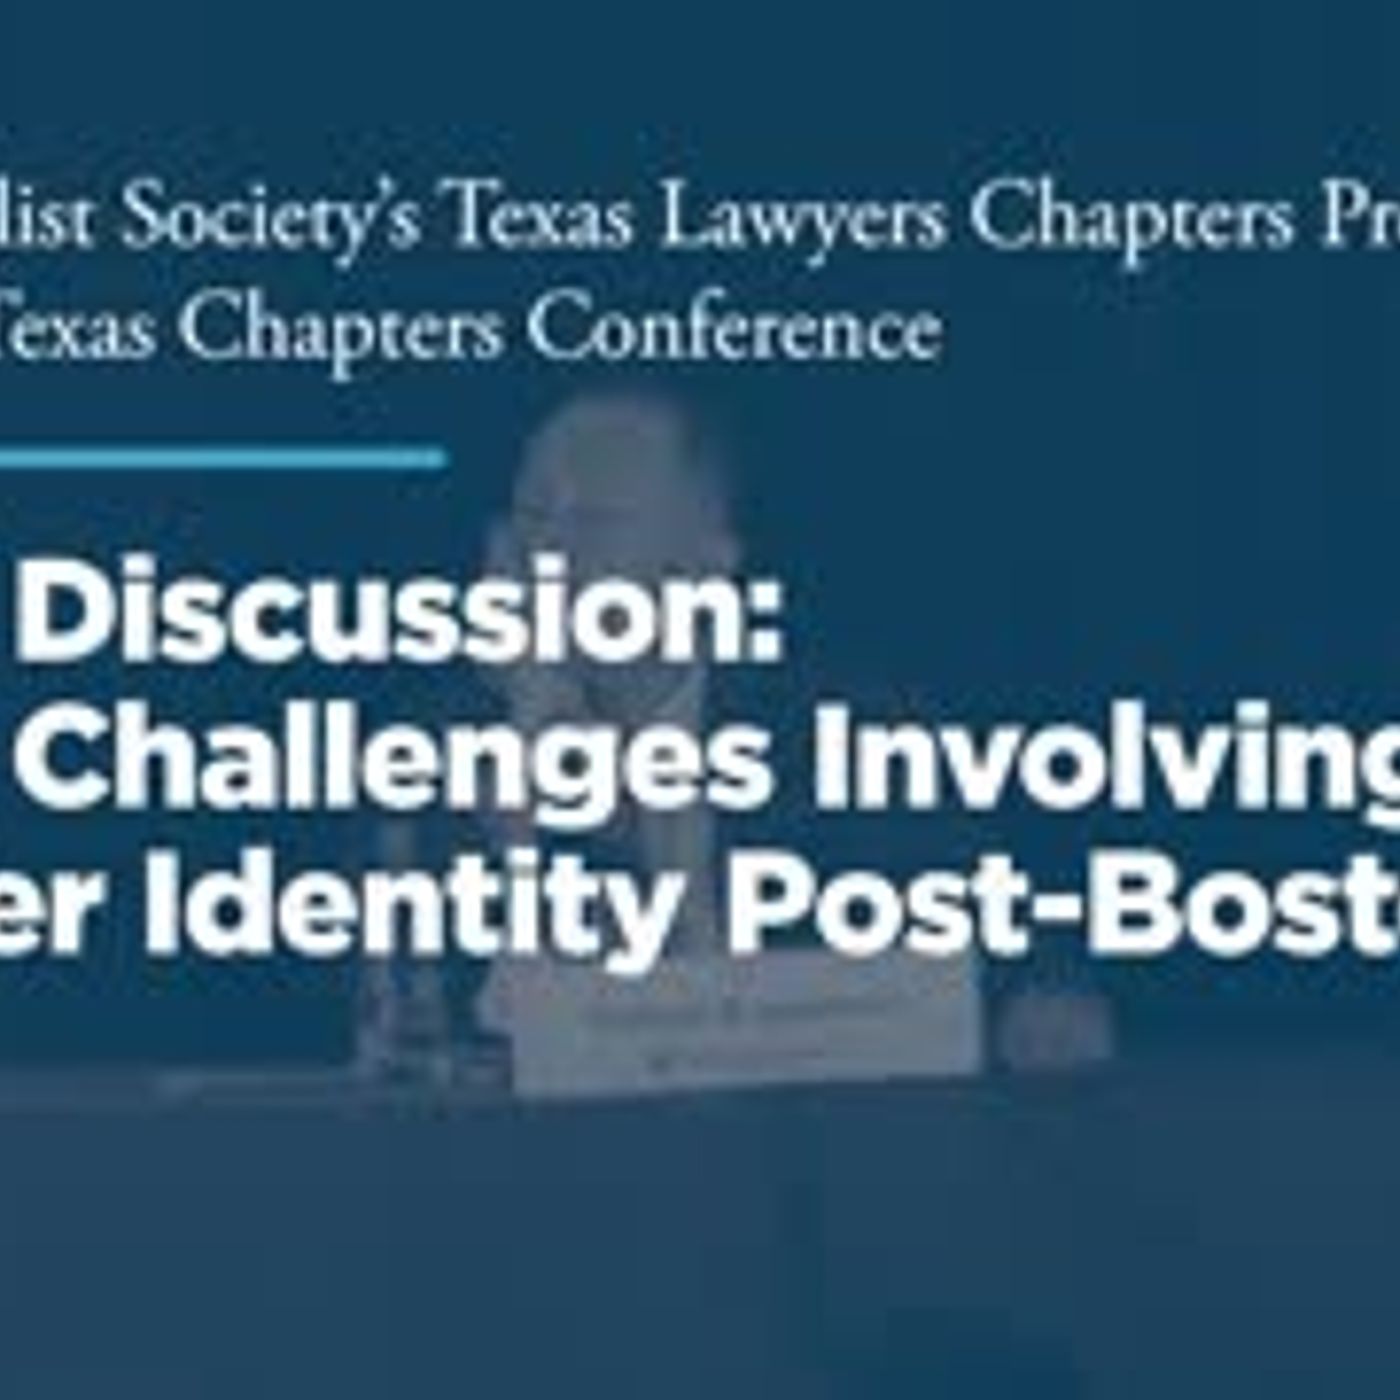 Panel Discussion: Legal Challenges Involving Gender Identity Post-Bostock